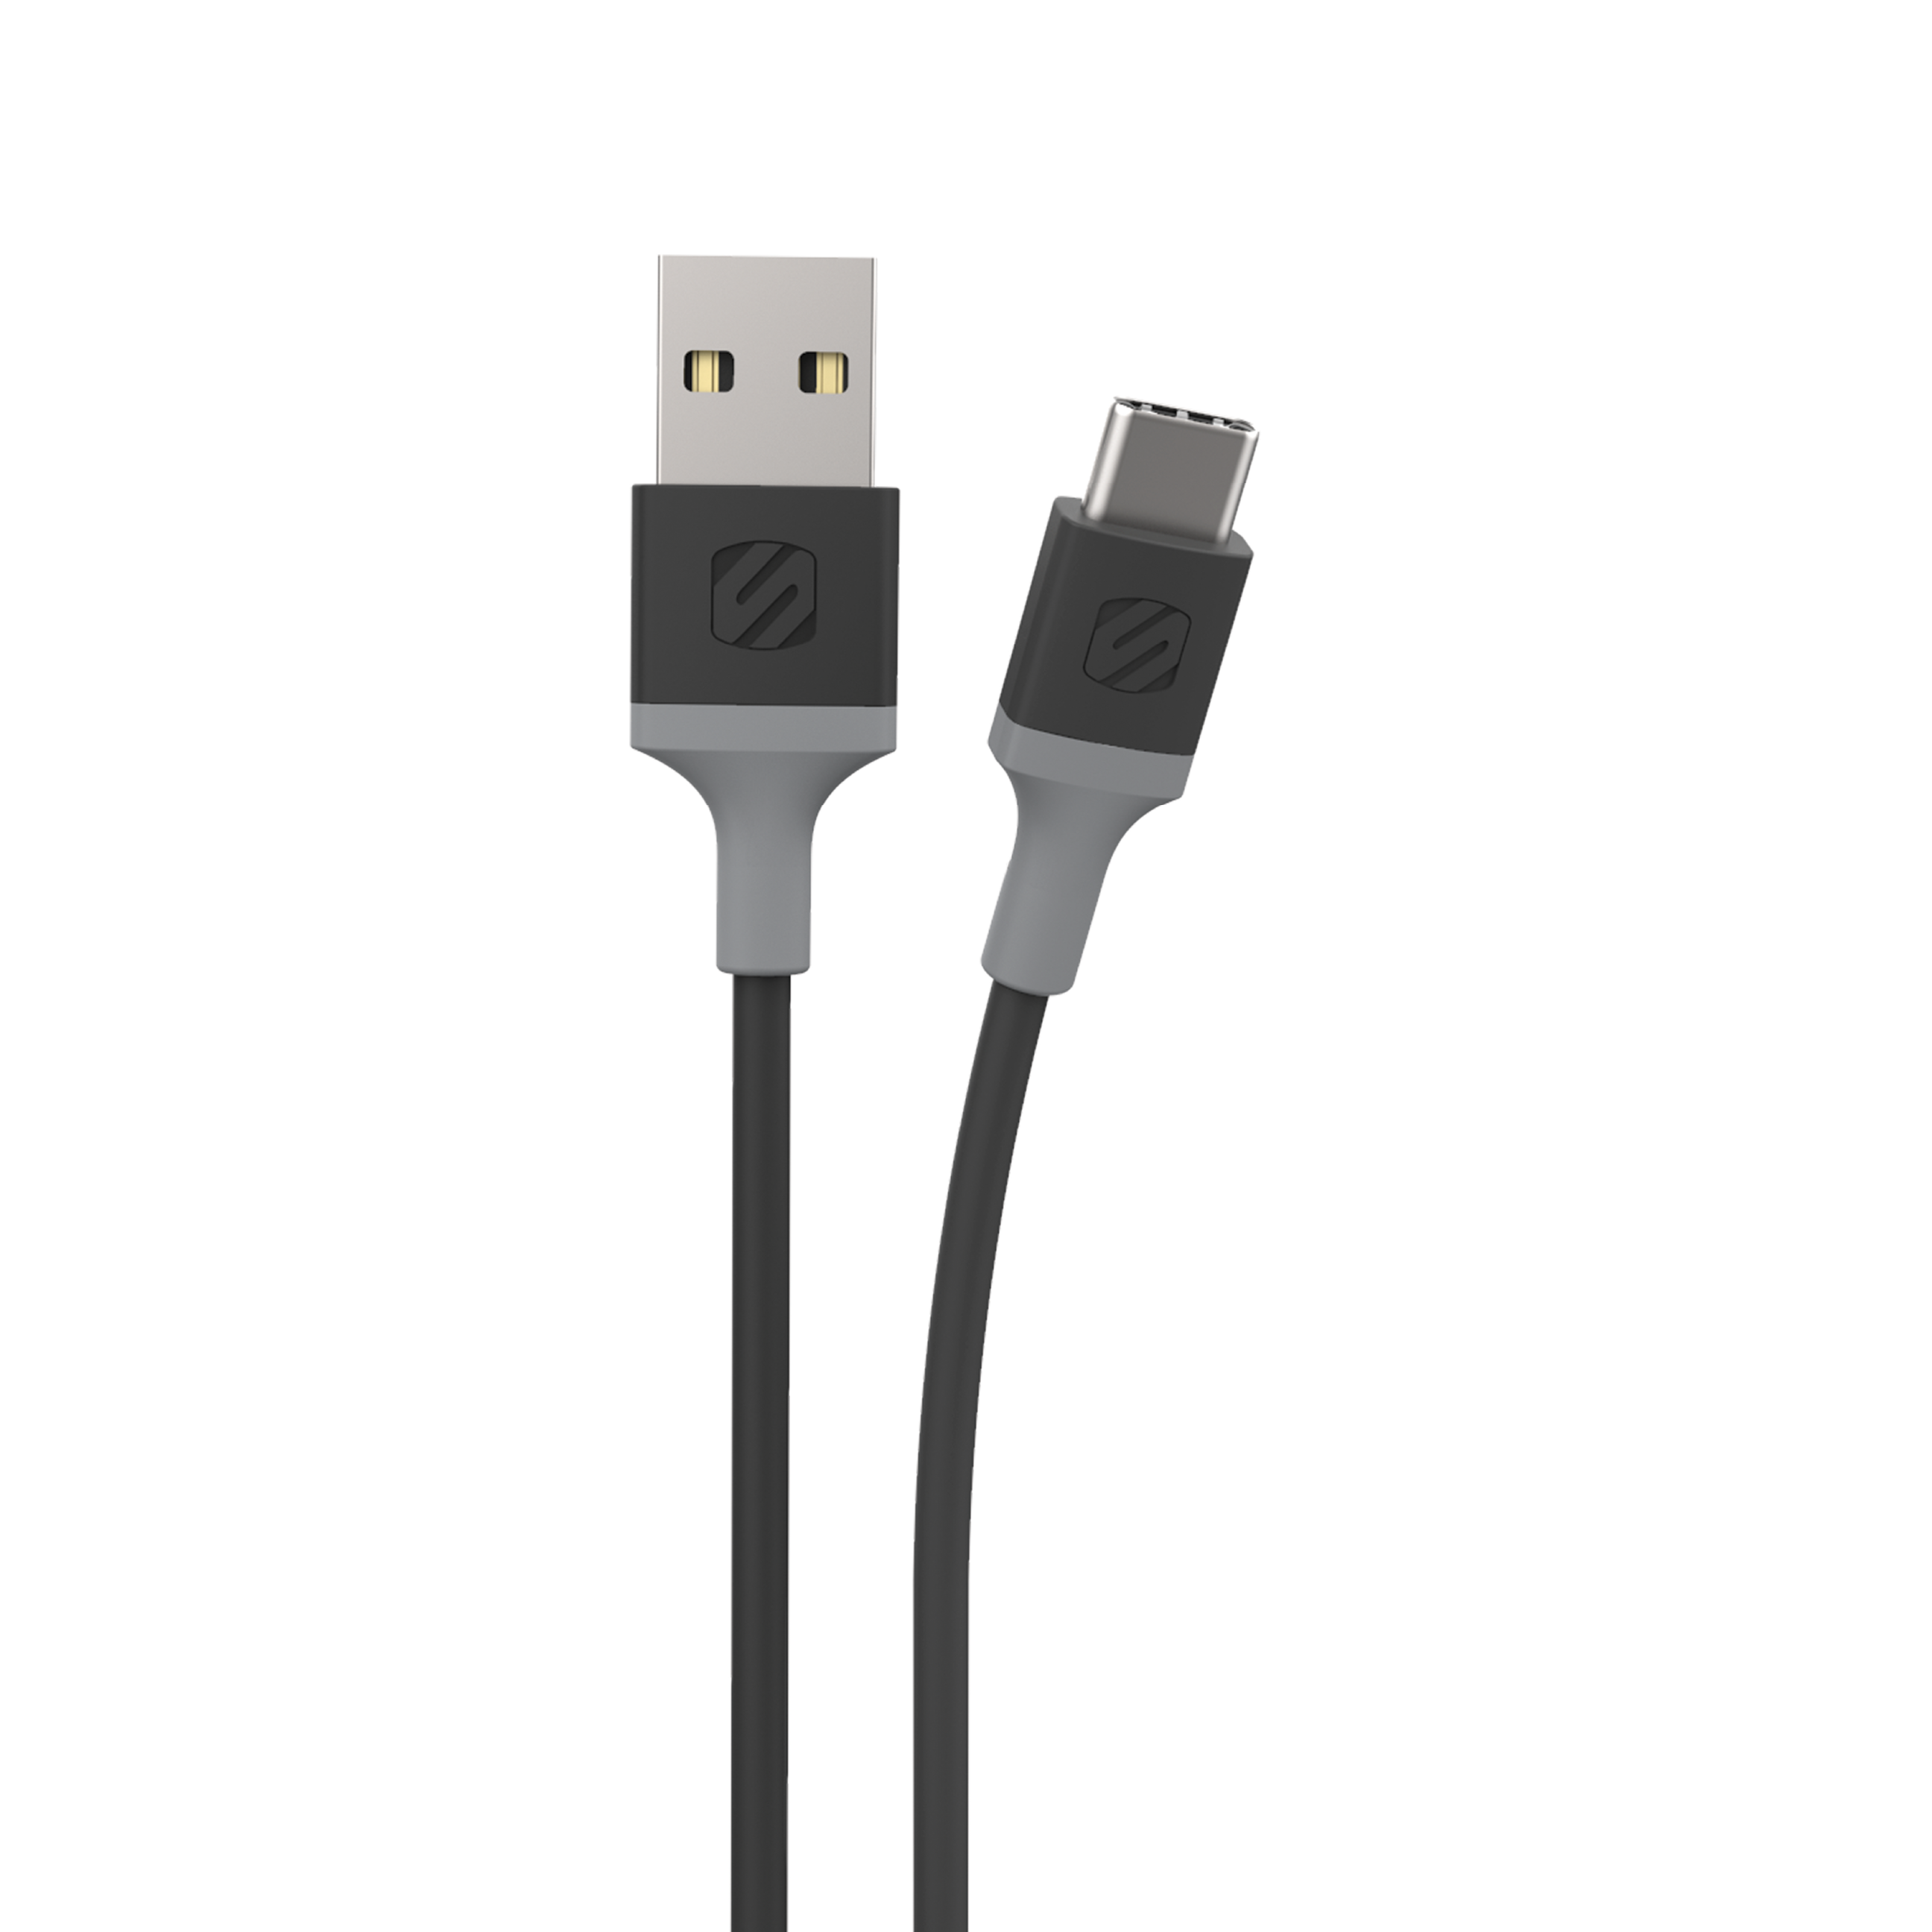 Scosche Ca4by-Sp Strikeline USB-A to USB-C & Sync Cable 4 ft. Space Gray - image 1 of 6